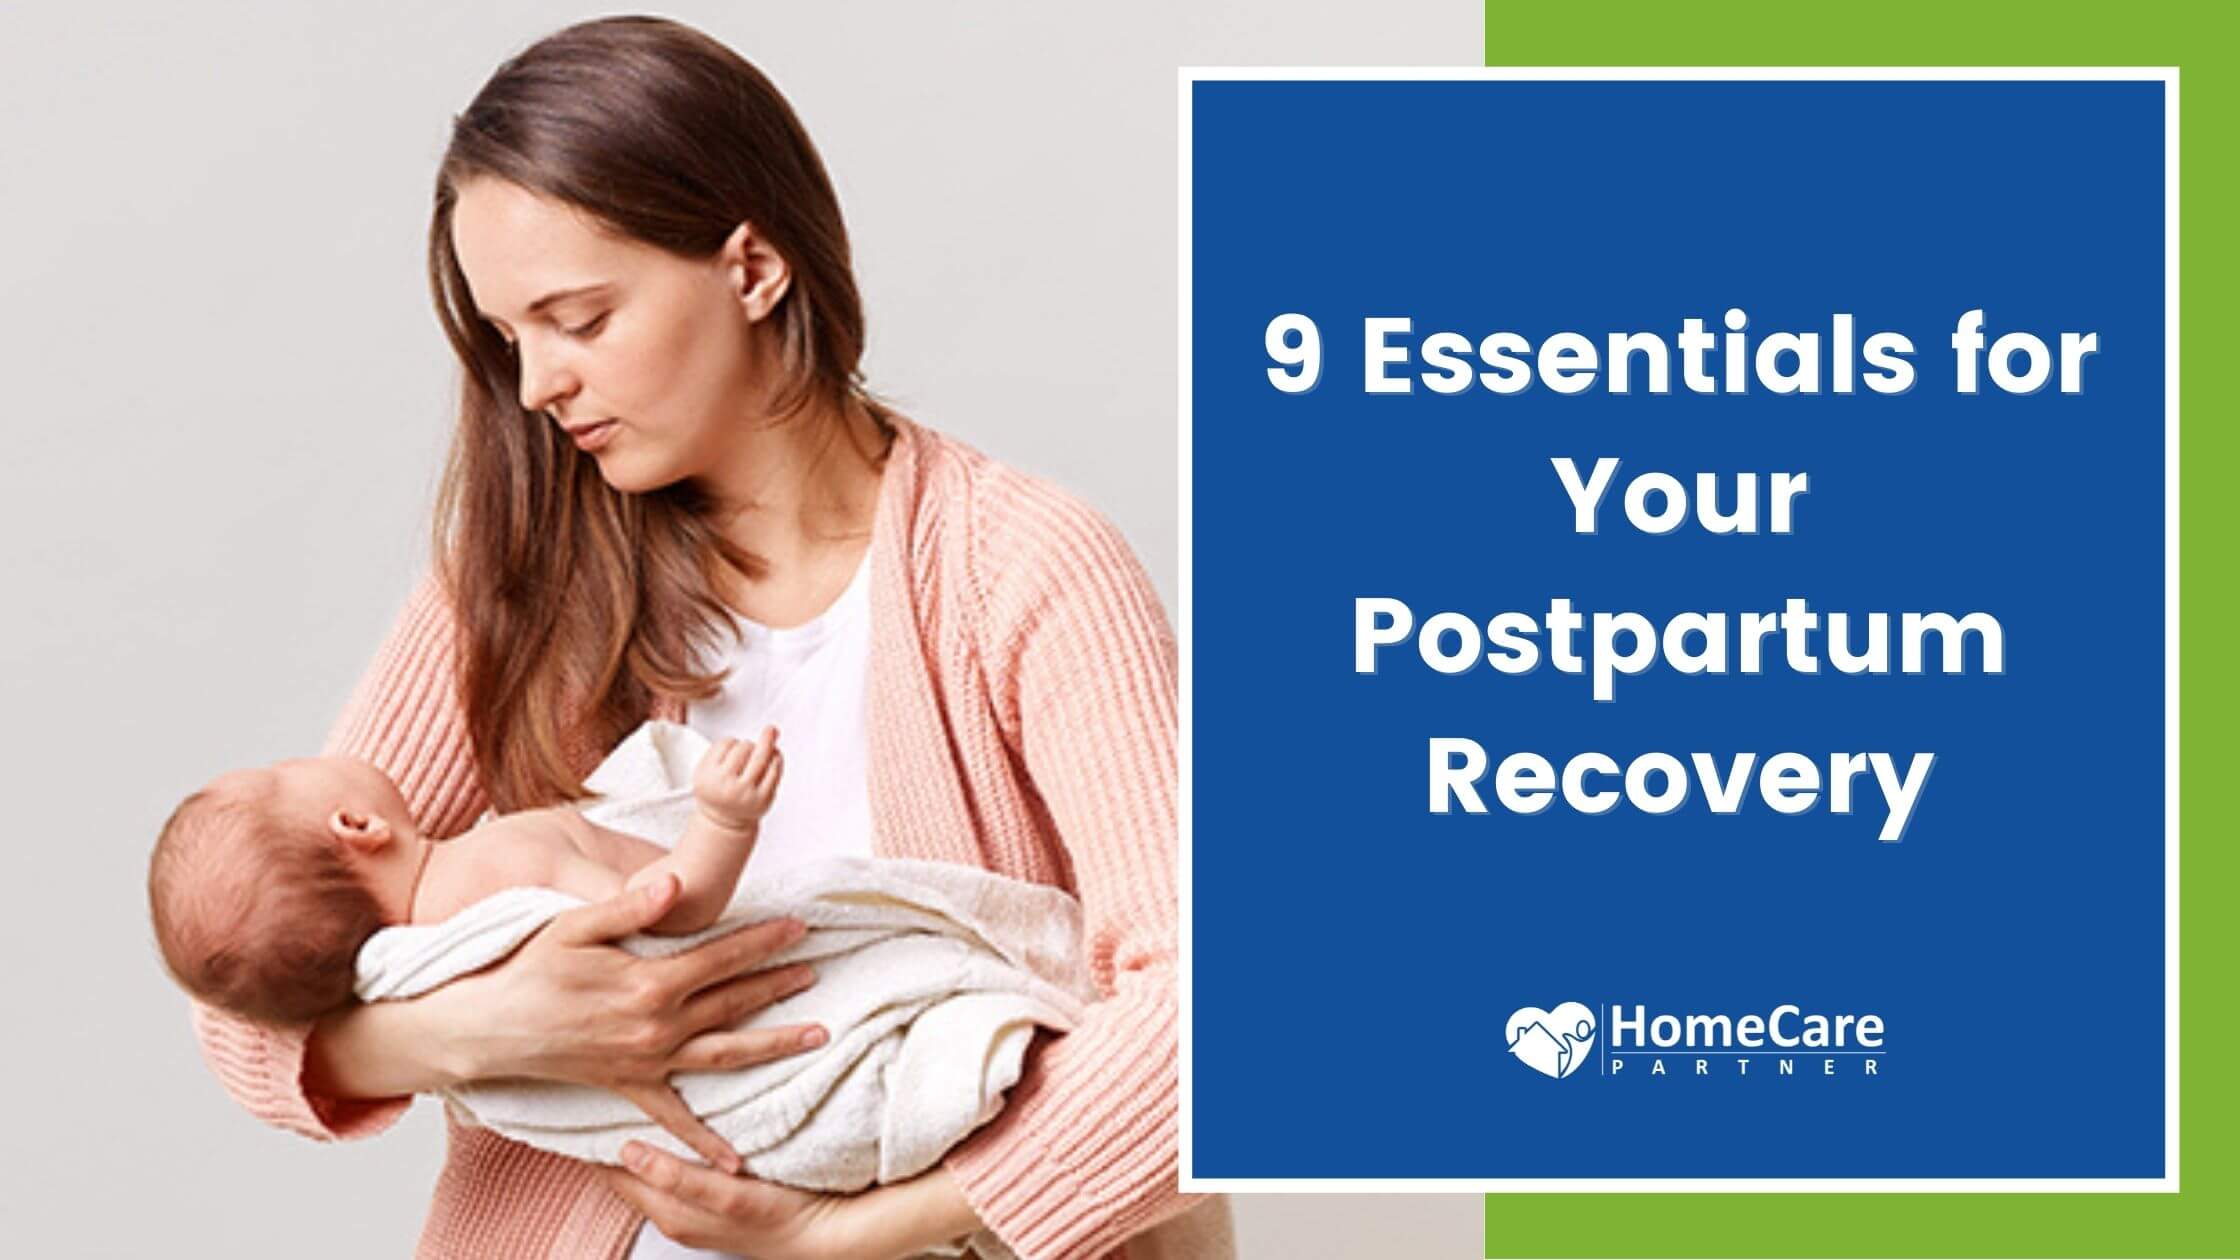 9 Essentials for Your Postpartum Recovery